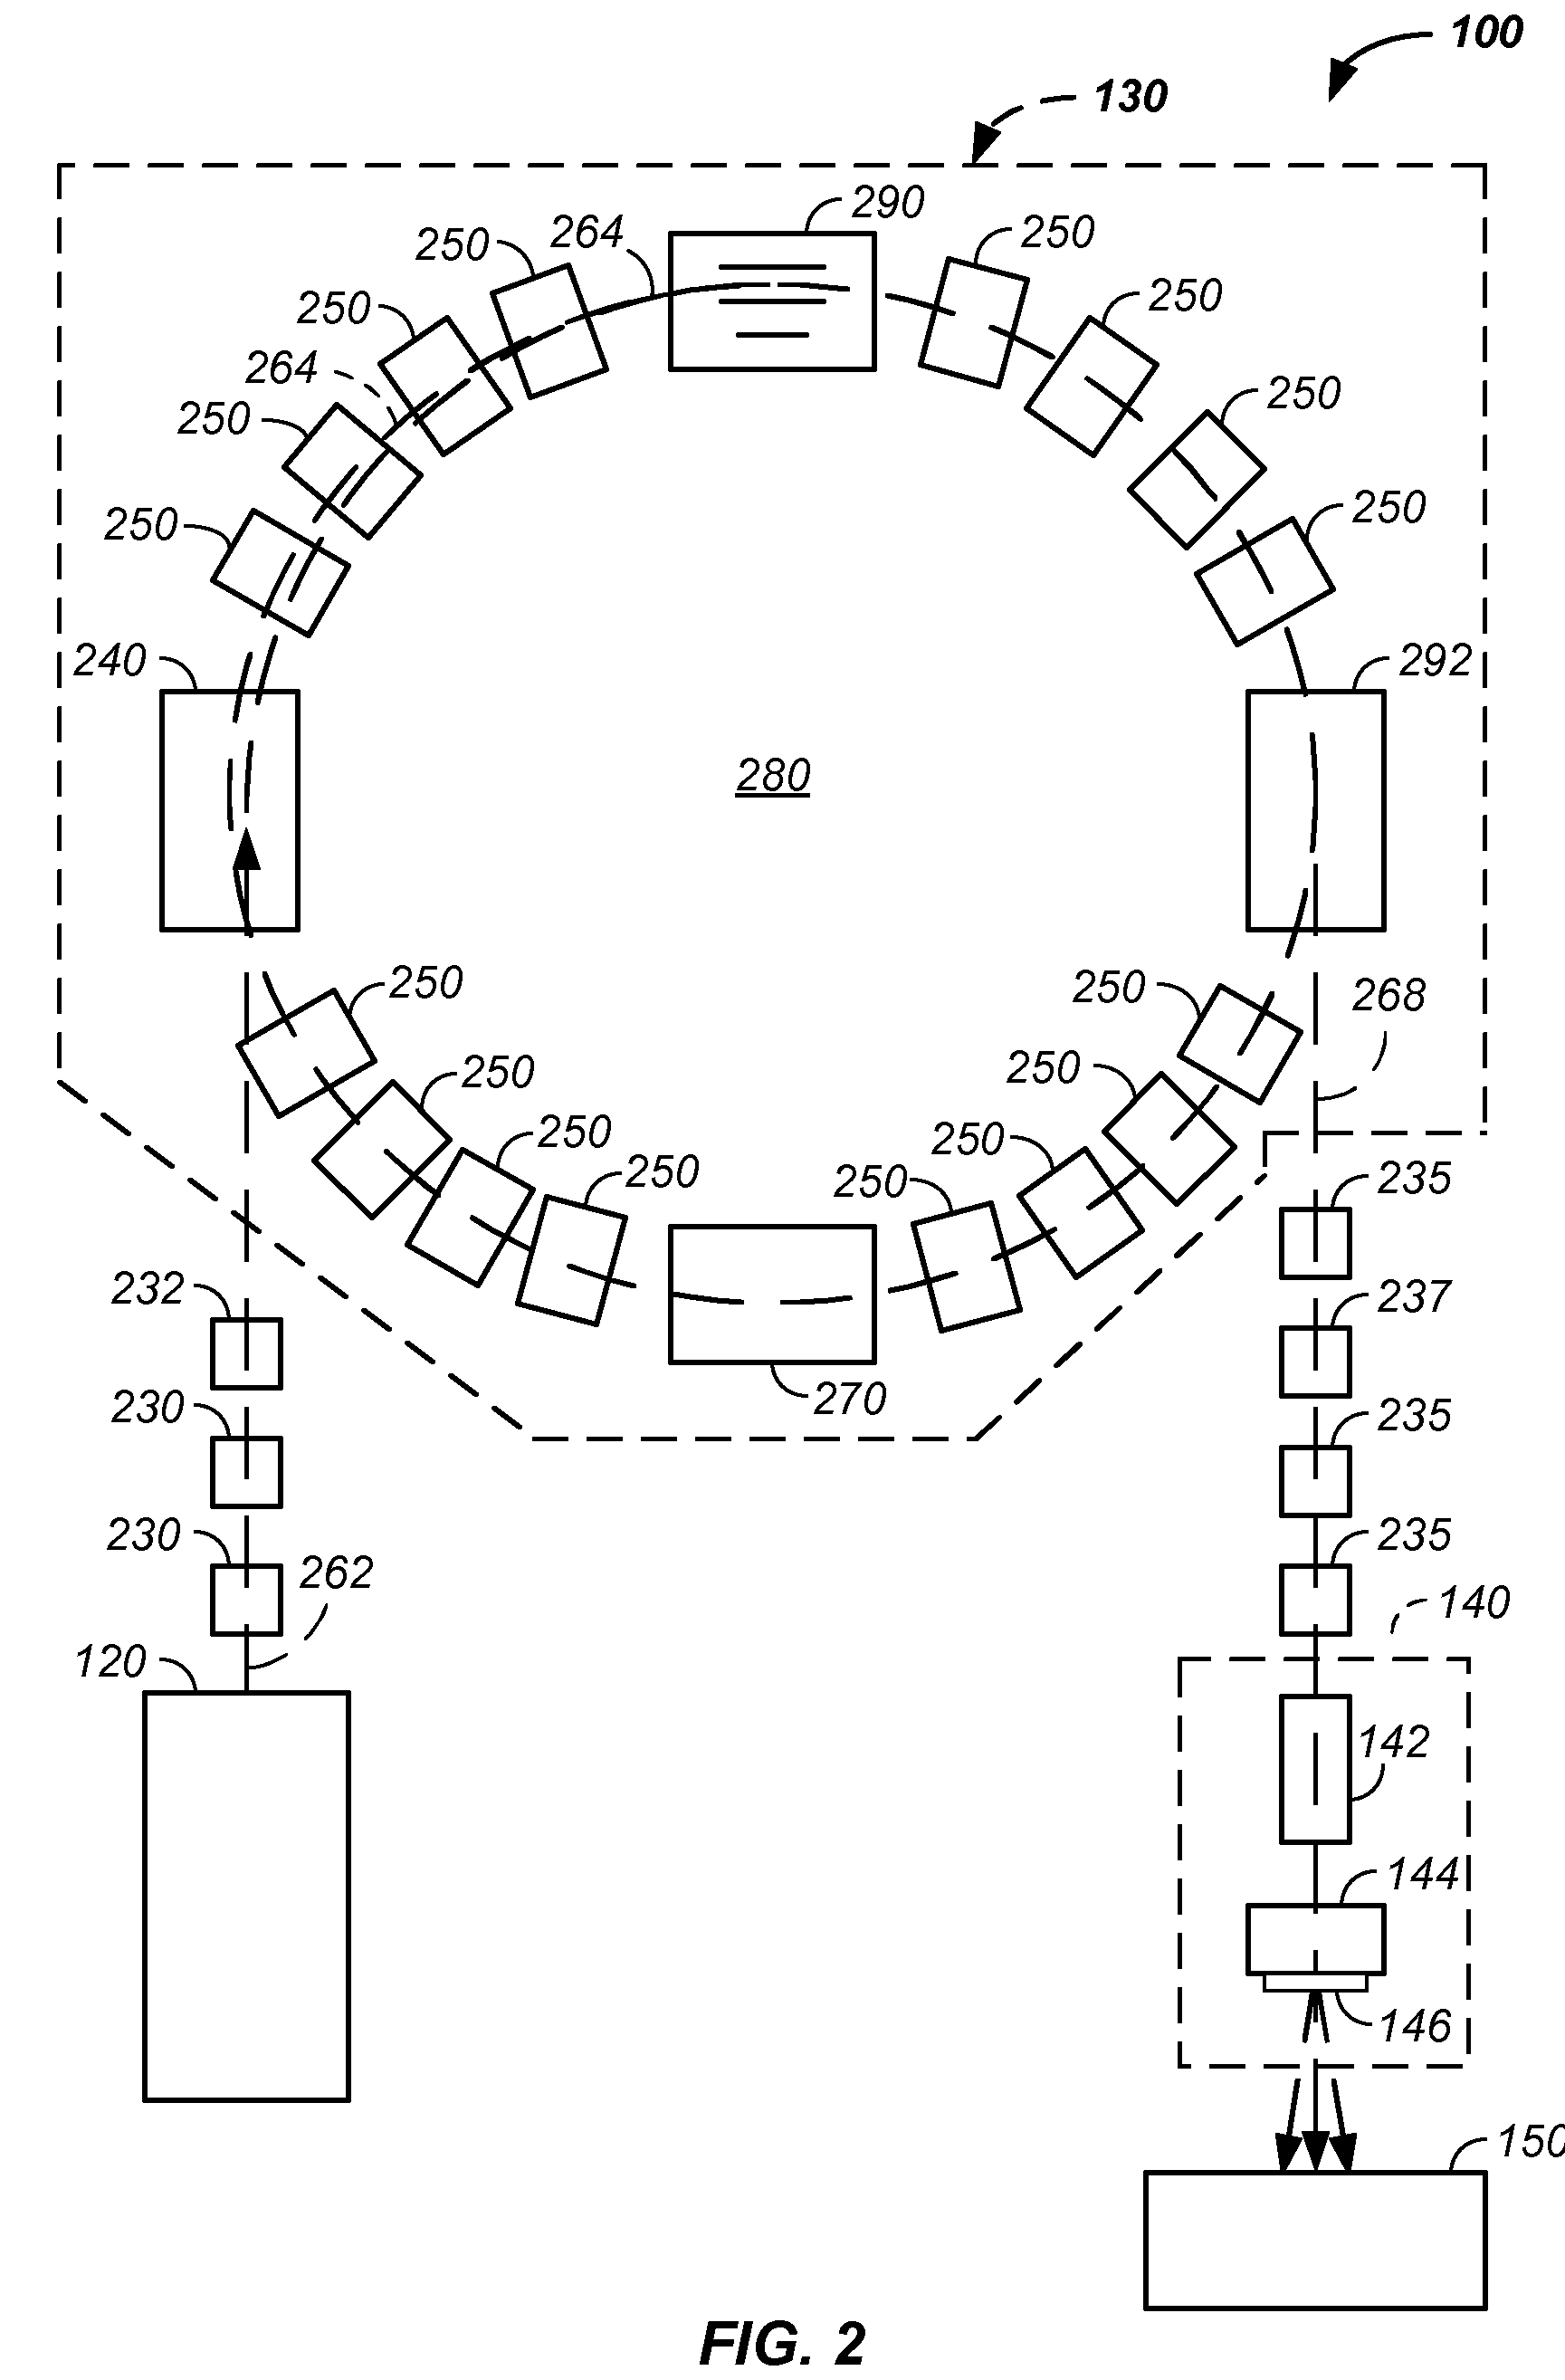 Multi-axis/multi-field charged particle cancer therapy method and apparatus